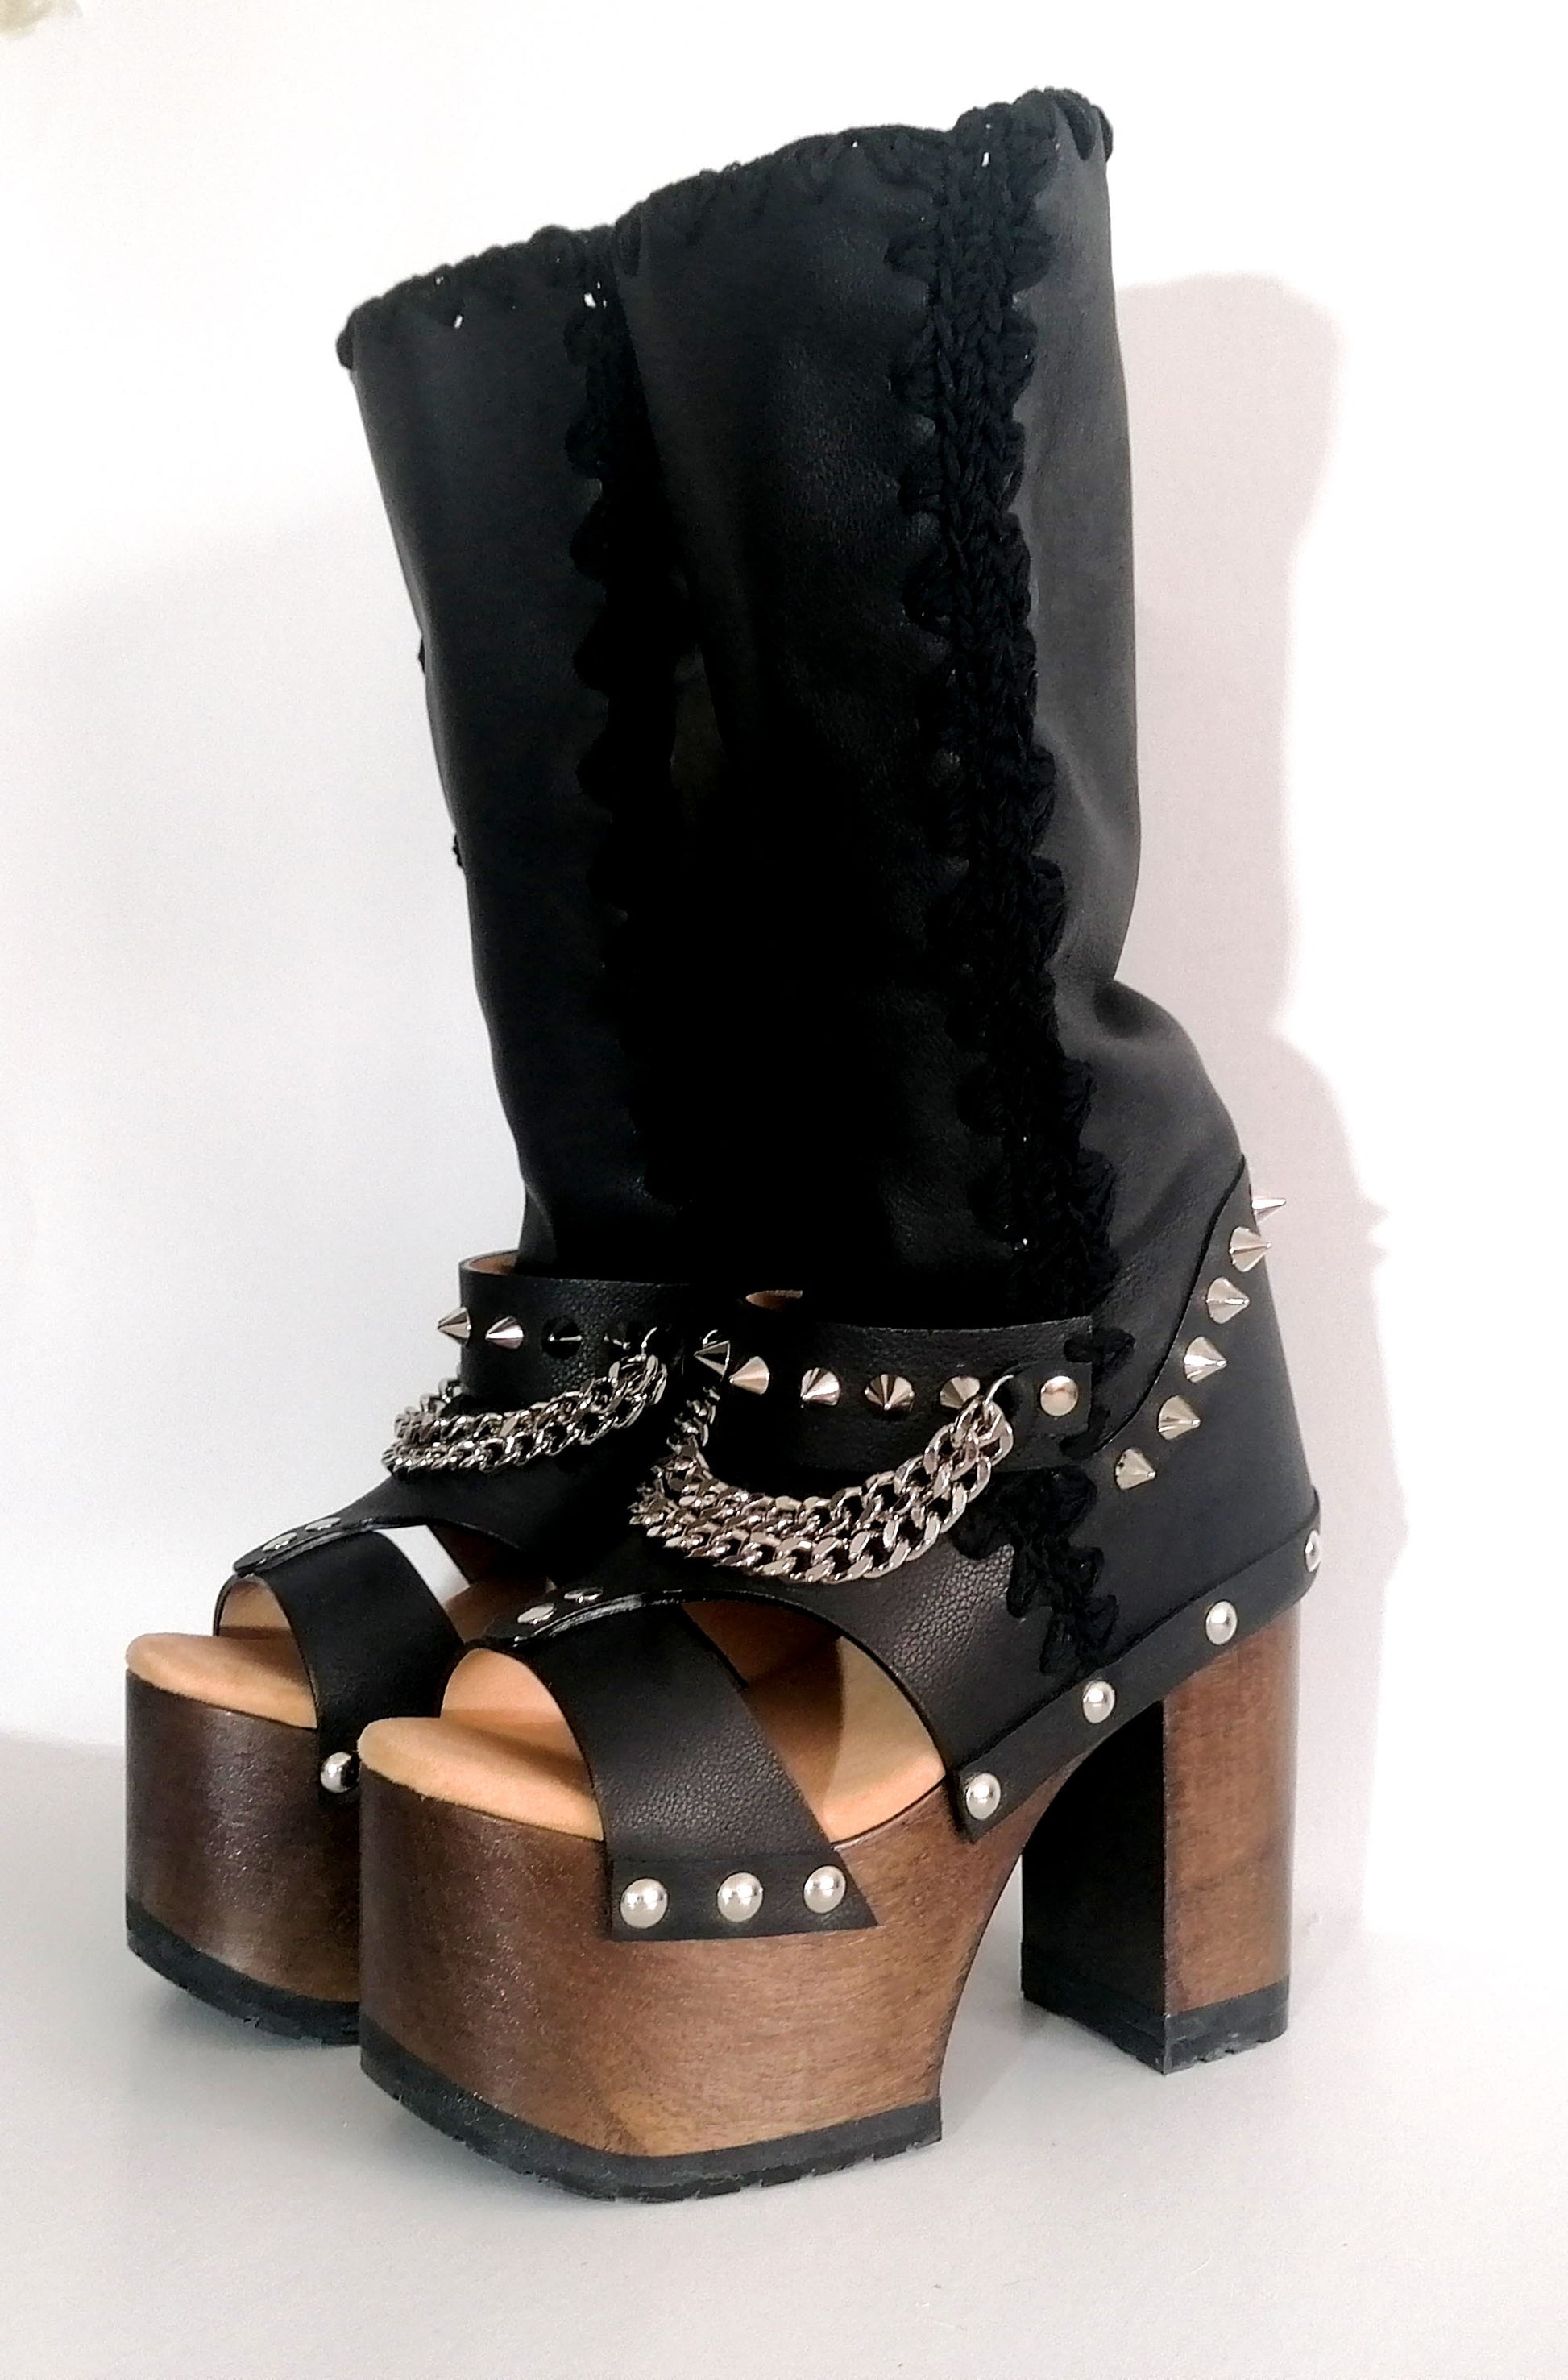 Black platform sandal with super high heel. Black super high heel platform boot with studs and silver chains. Super high heel biker style boot. Sizes 34 to 47. Handmade leather shoes by sol Caleyo.